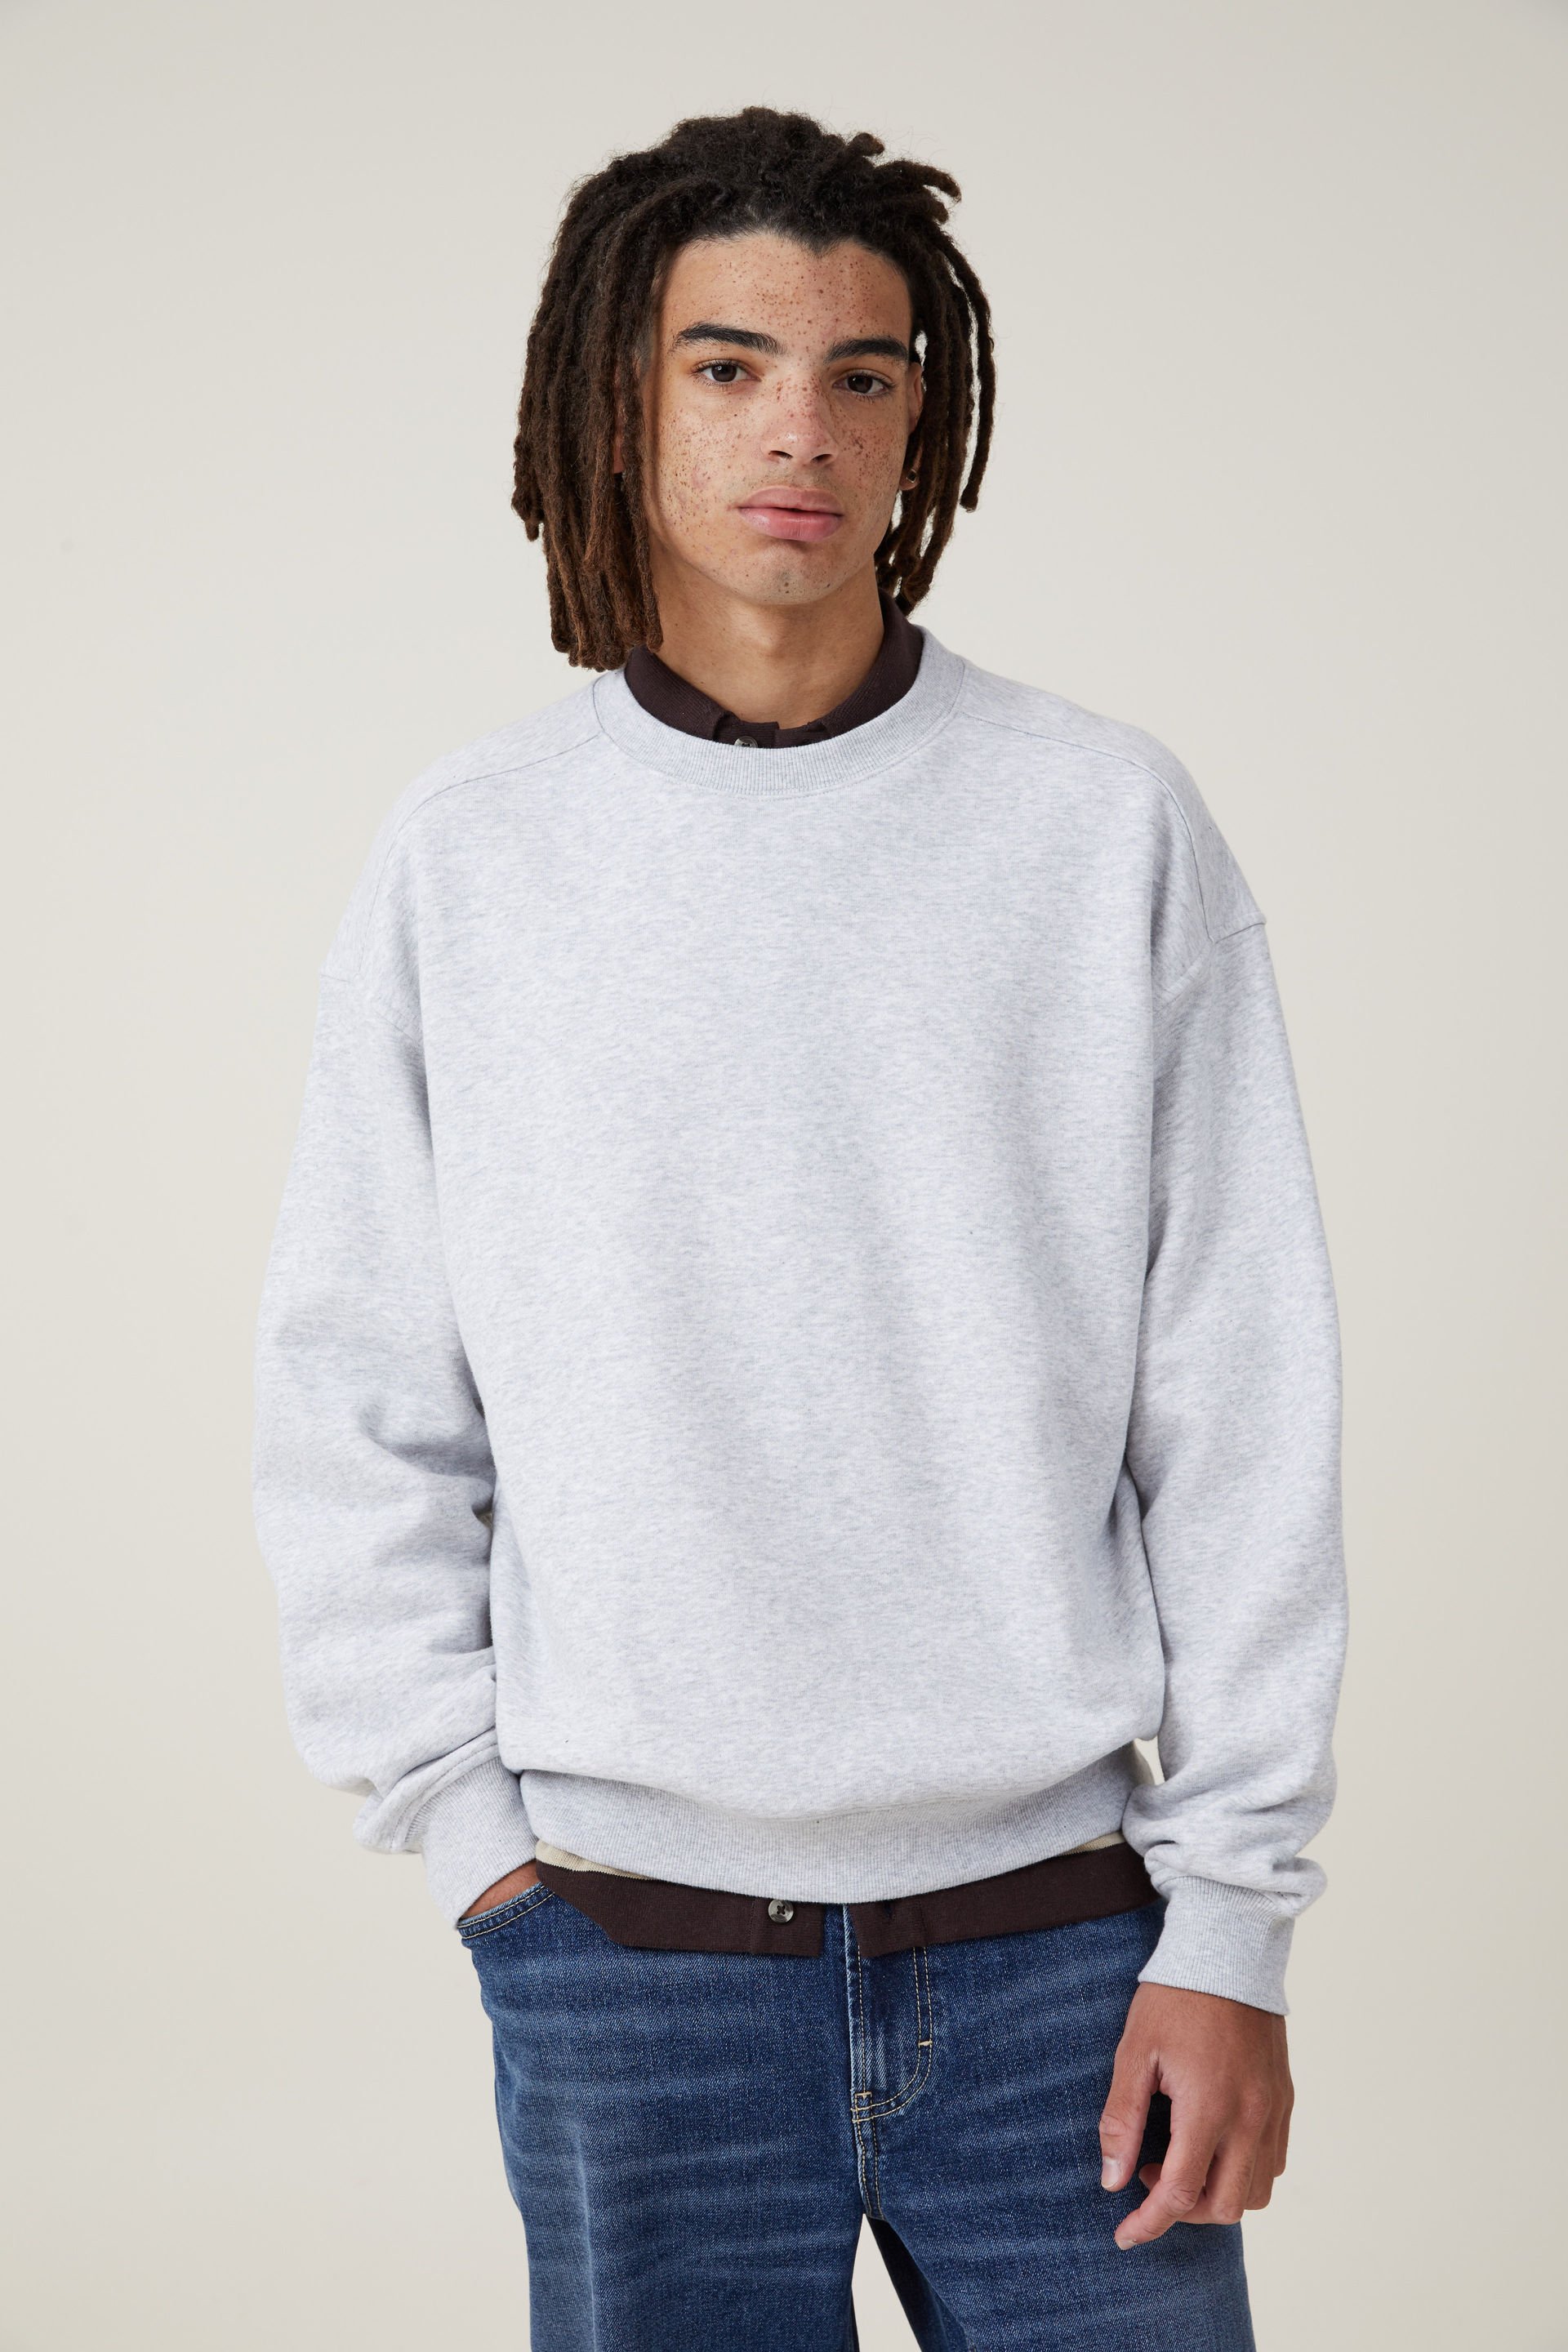 Cotton On Men - Box Fit Crew Sweater - Grey marle